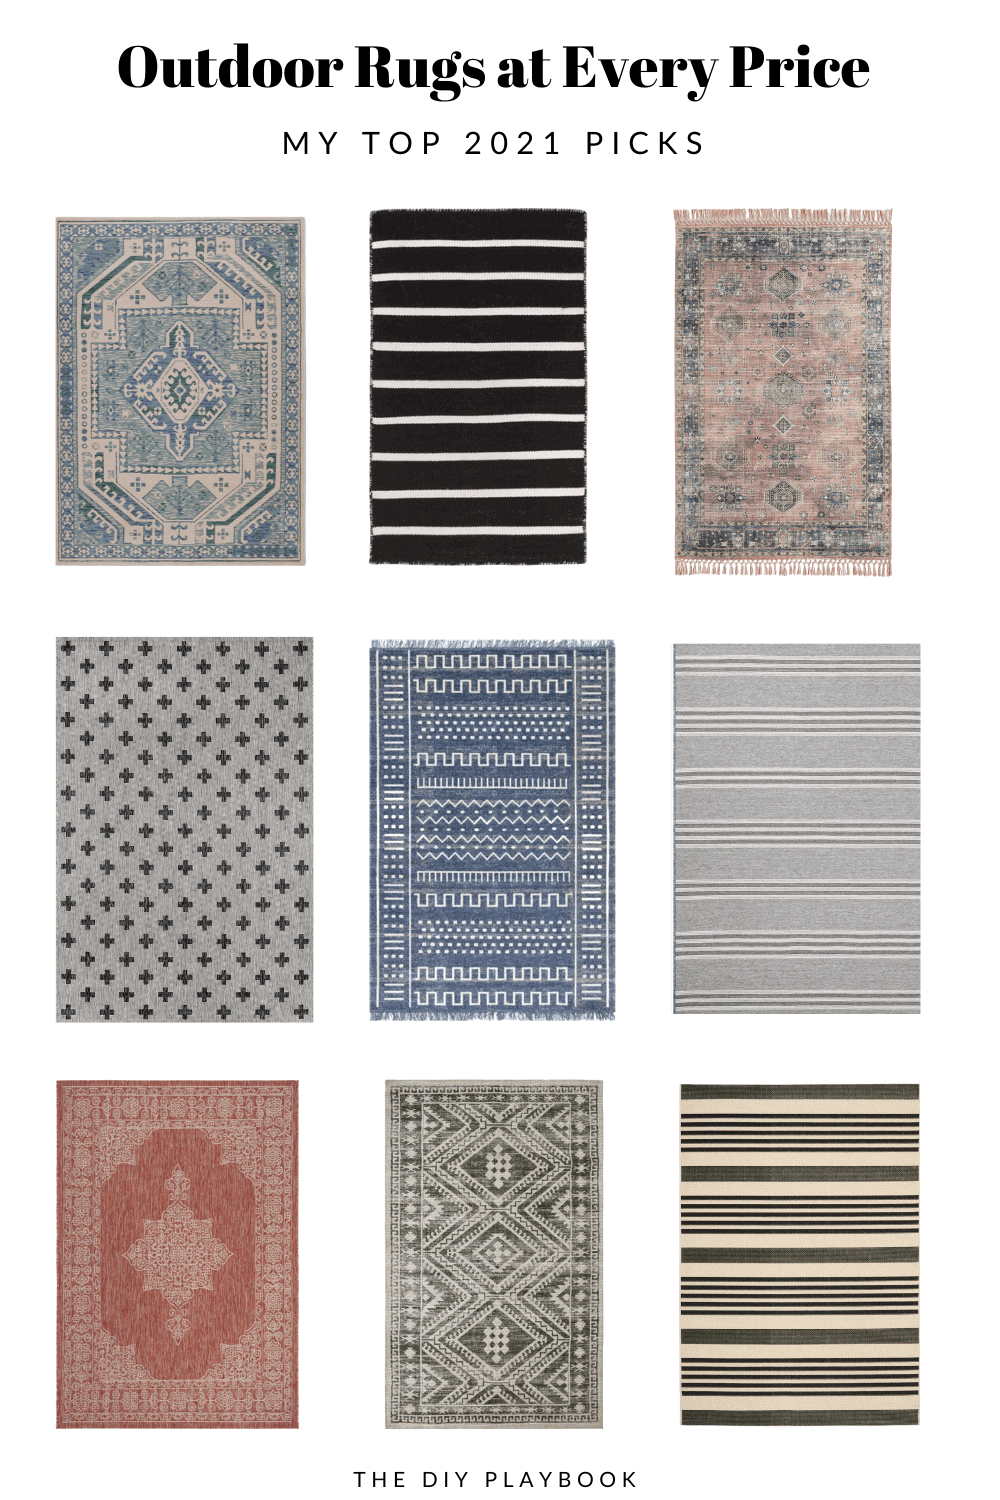 My favorite outdoor rugs for summer 2021